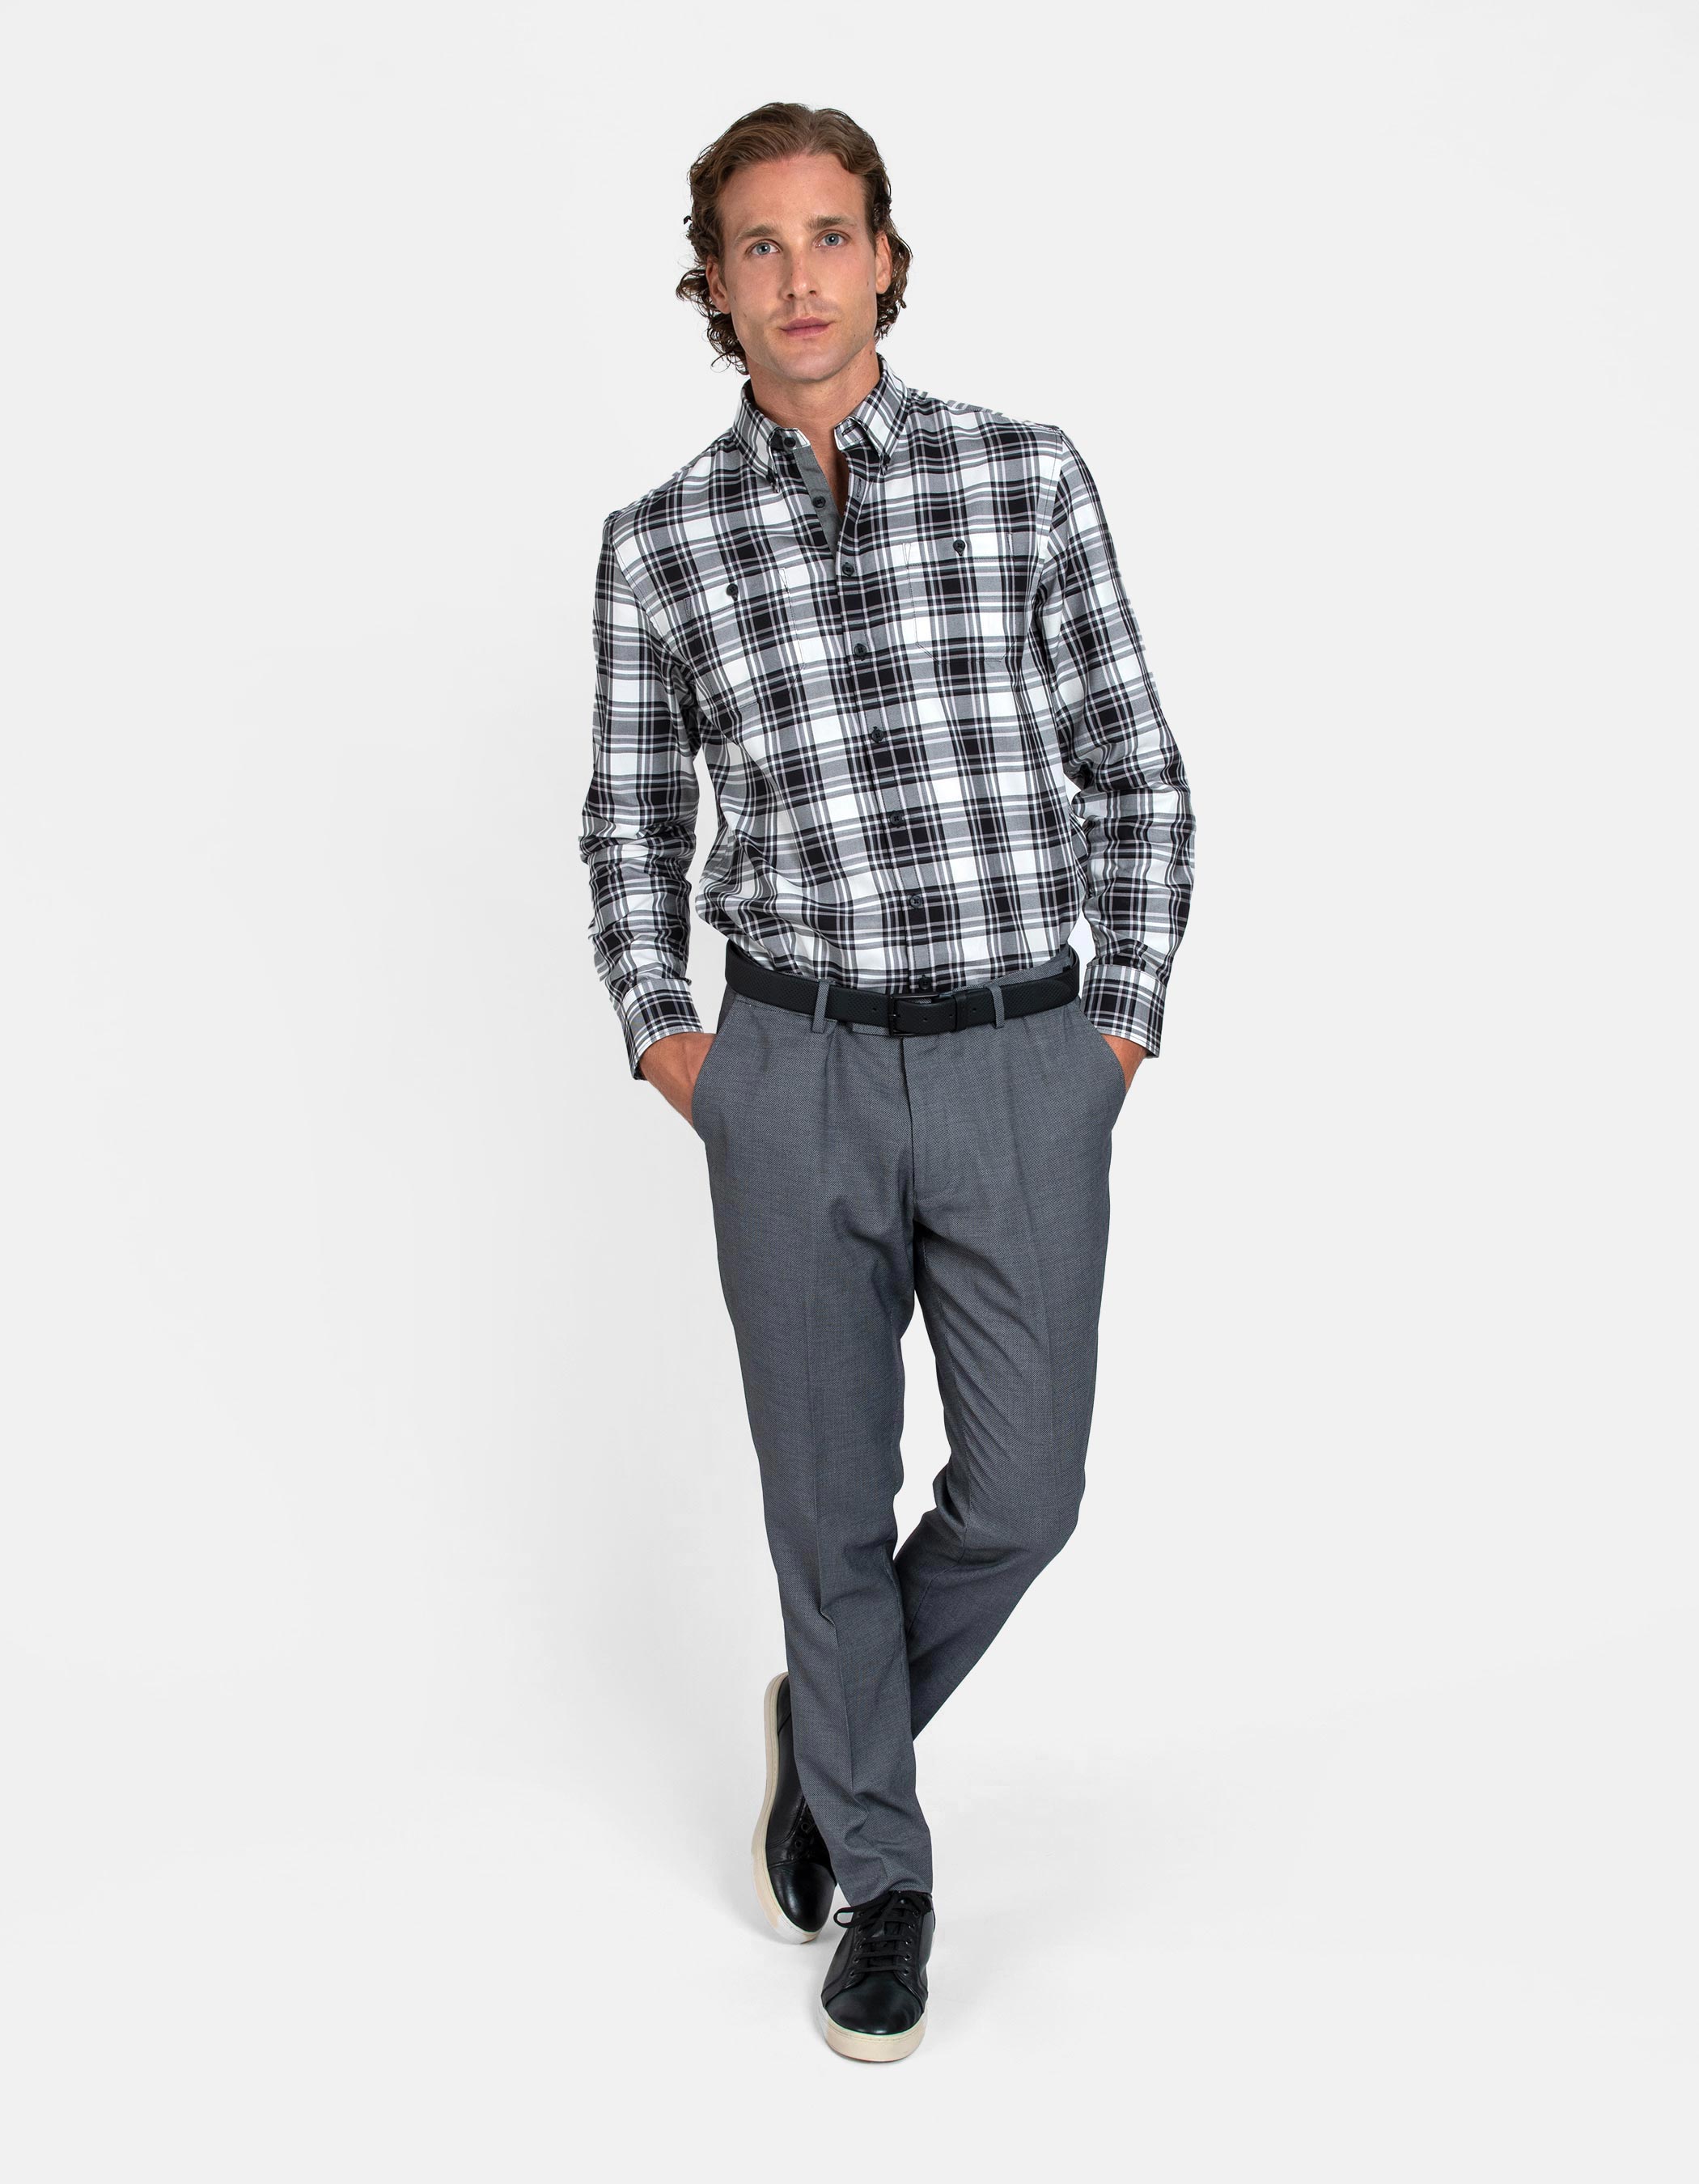 Checked shirt elbow patches 3